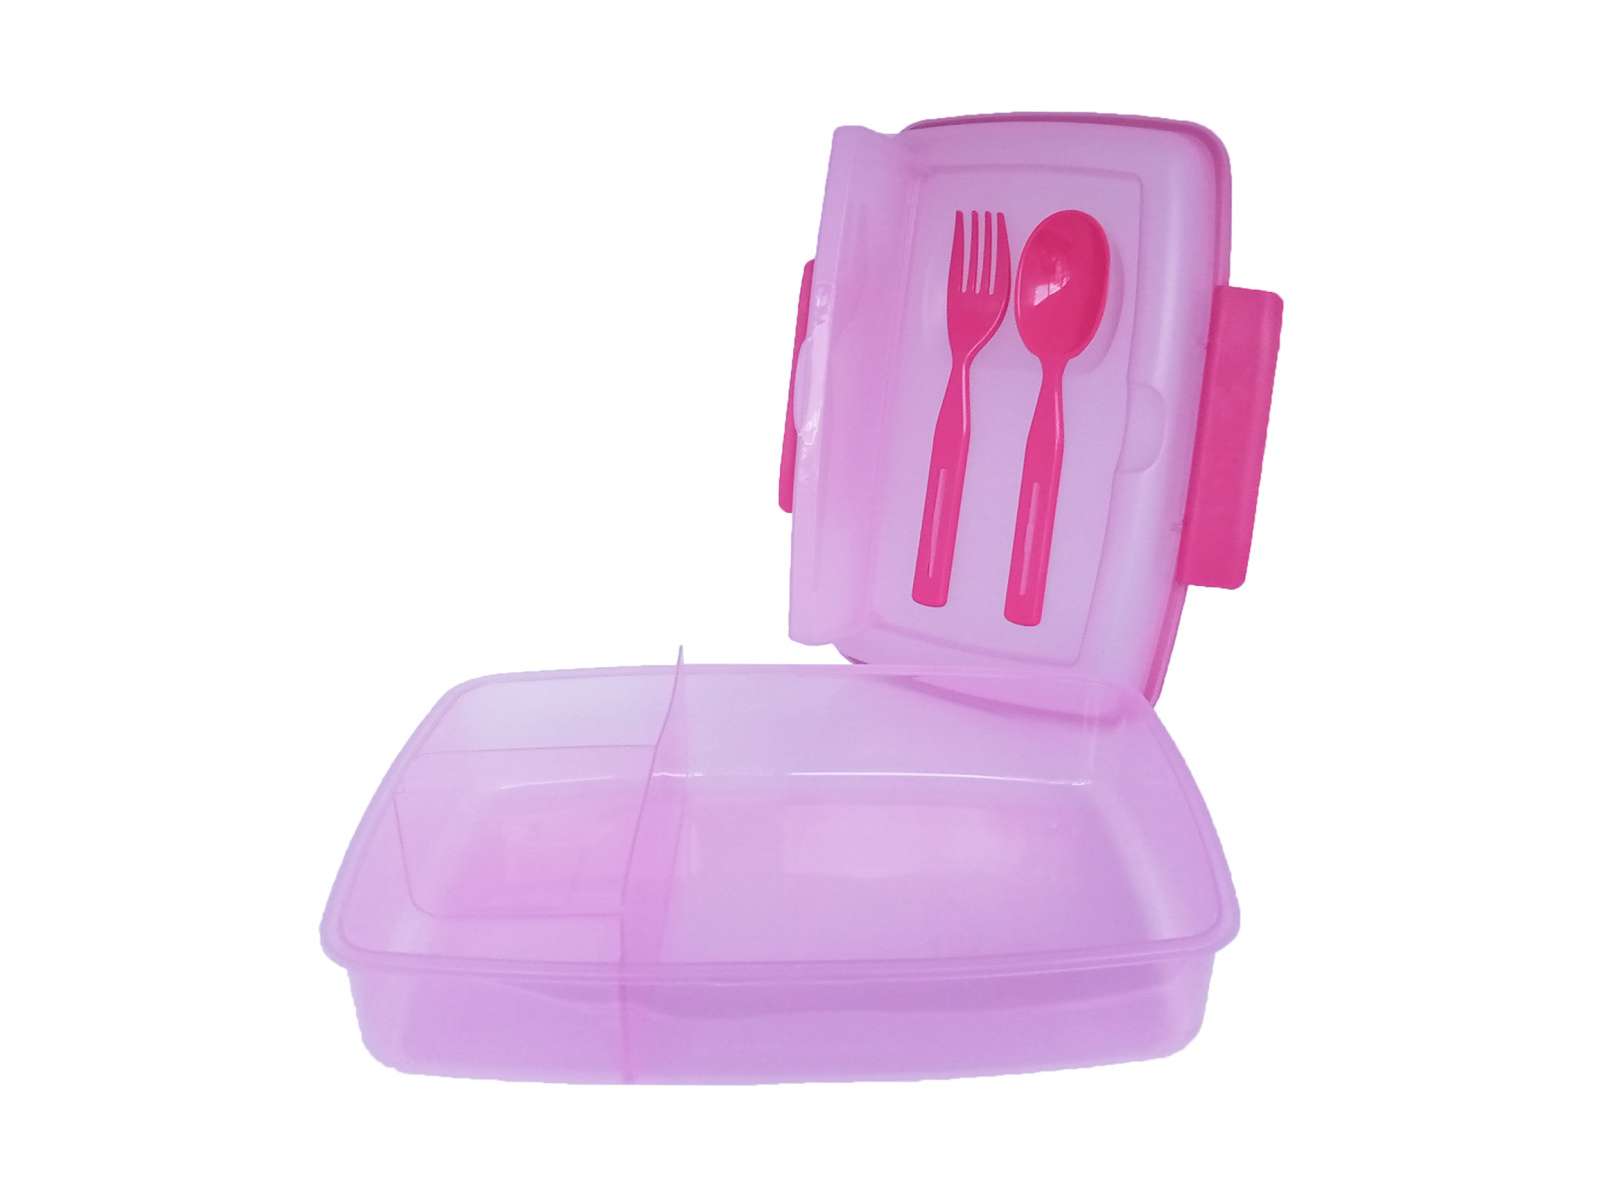 Large lunch box (utensil included)